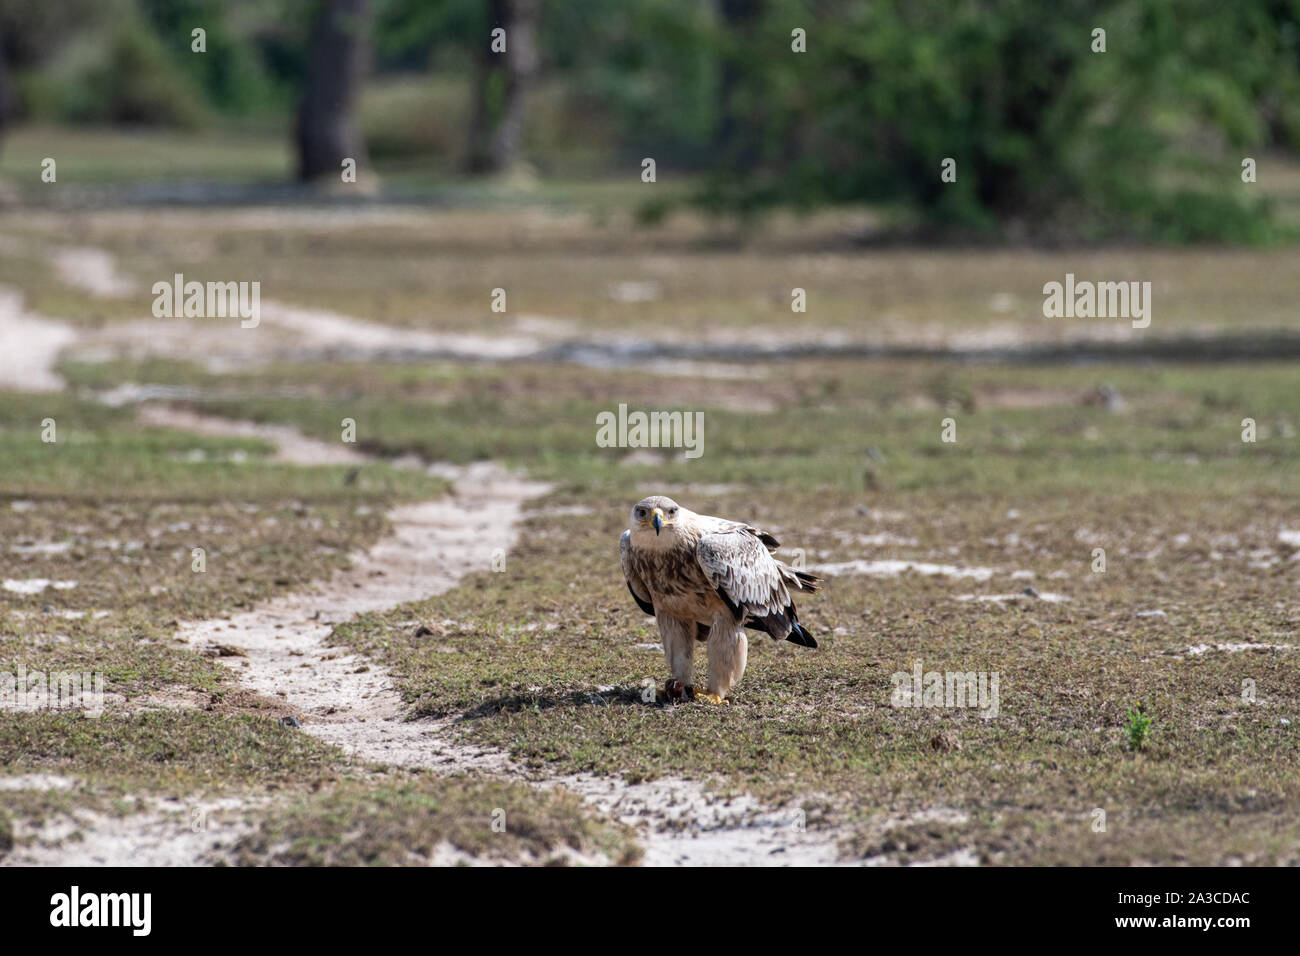 Tawny eagle or Aquila rapax with a Spiny tailed lizard or Uromastyx kill in his claws in an open field at tal chhapar blackbuck sanctuary, india Stock Photo